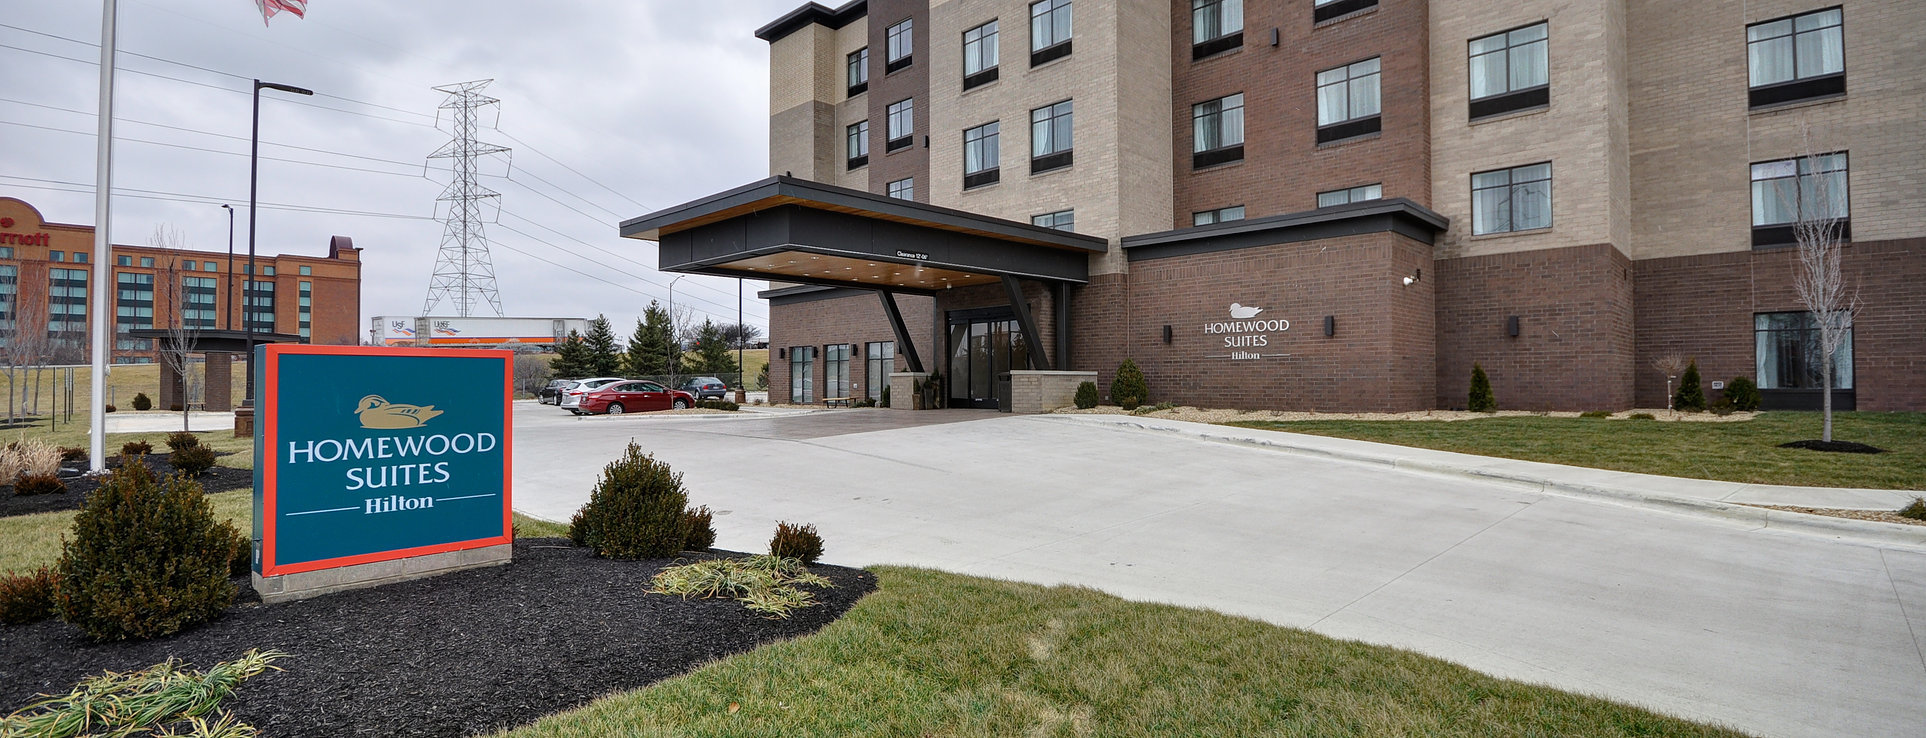 Photo of Home2 Suites Cincinnati/West Chester, West Chester, OH